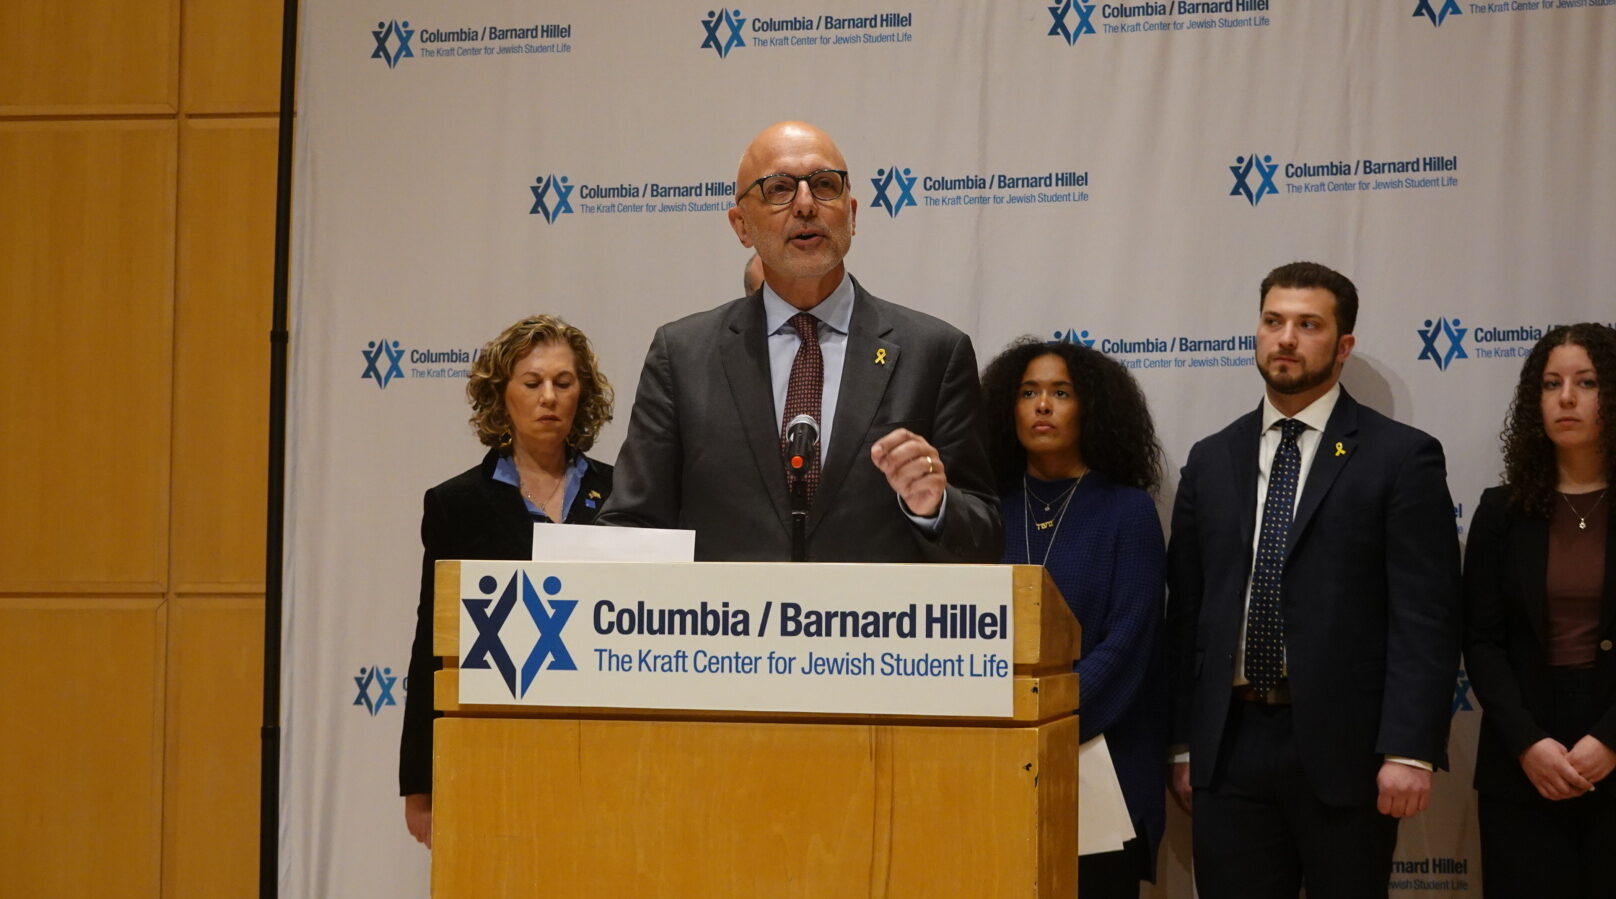 Trying to thread a needle on free speech, Jewish leaders demand Columbia rein in pro-Palestinian protests